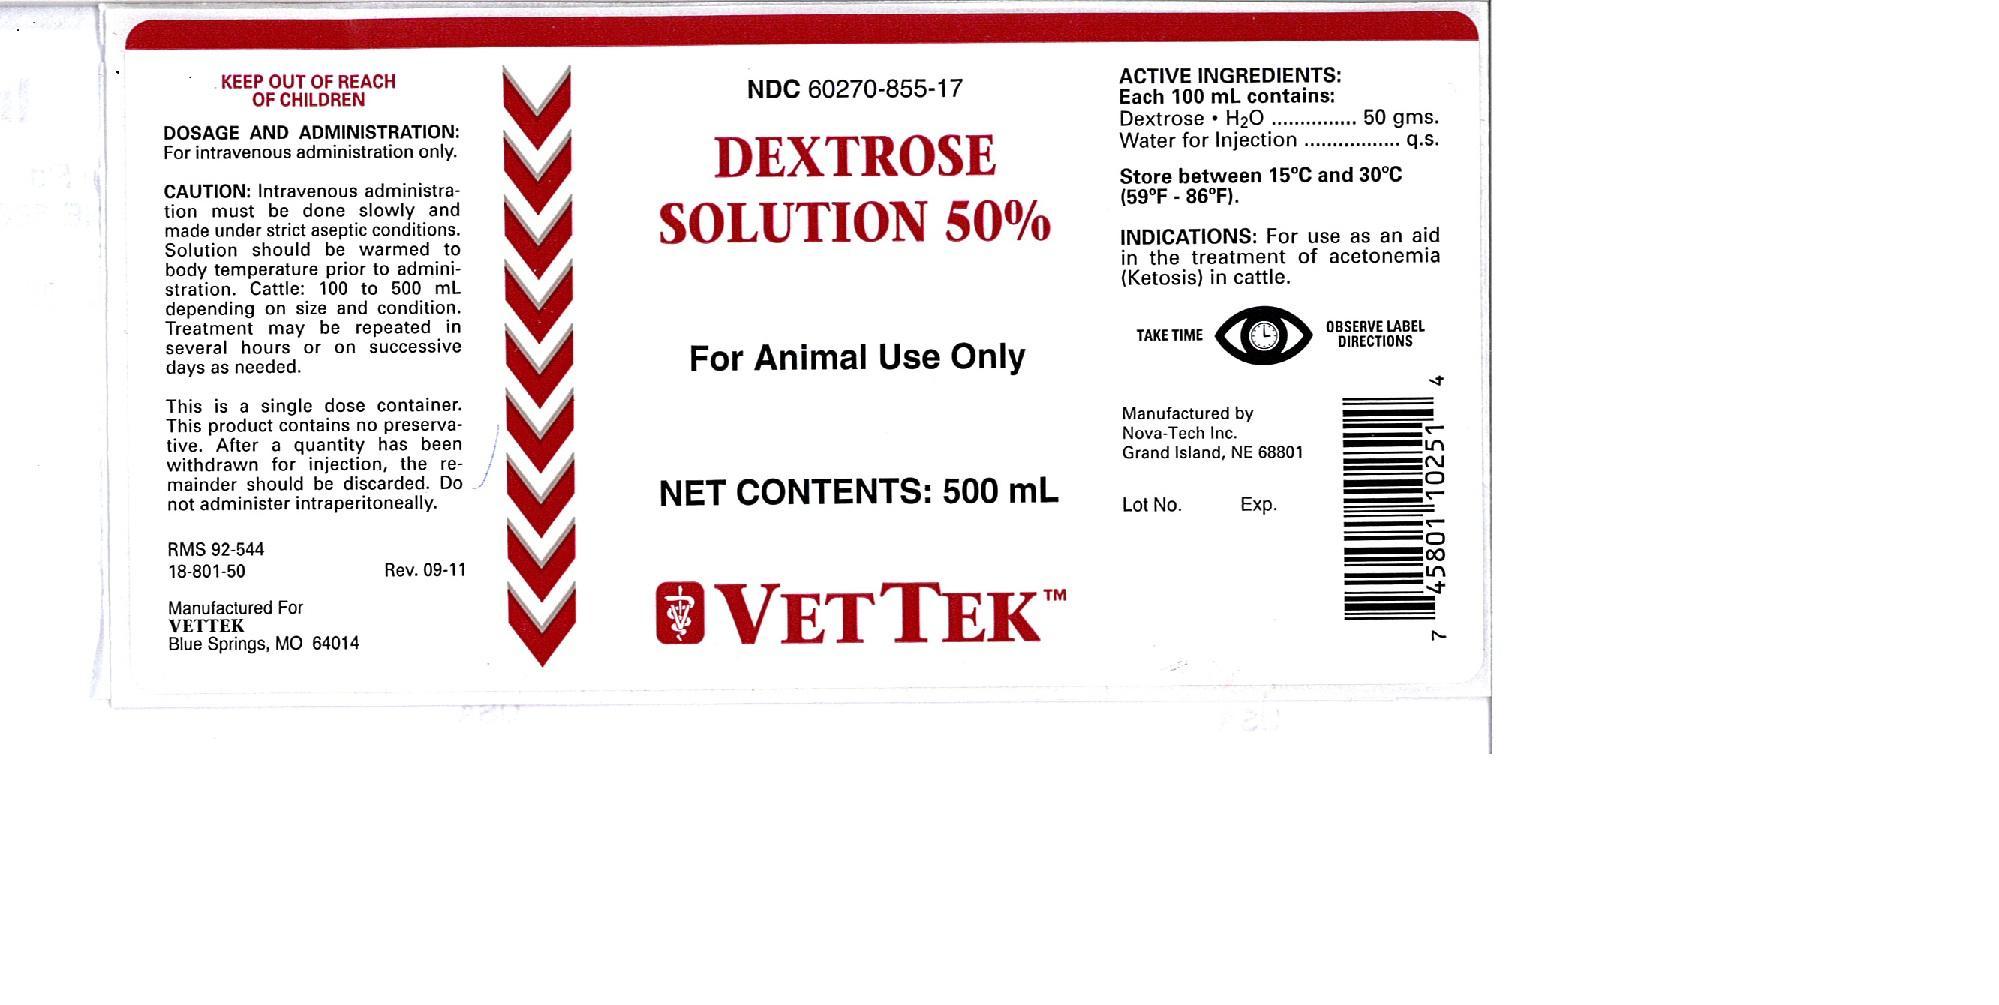 Image of container label